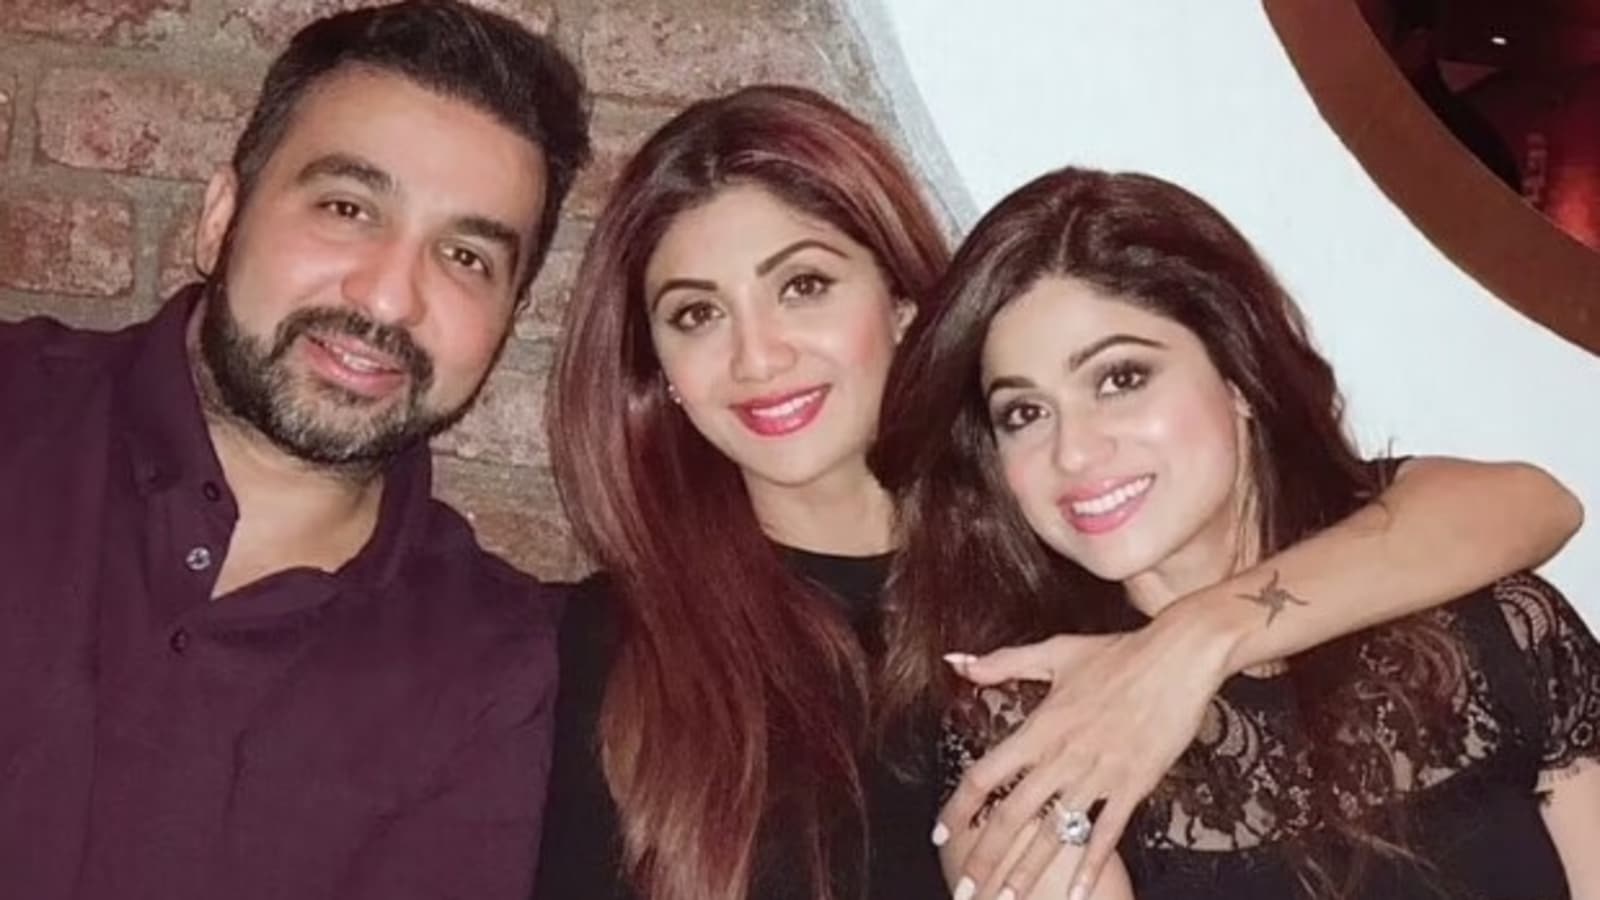 Bangole Xxx Bradar And Sistar Bedeo Com - Shilpa Shetty's sister Shamita Shetty shares cryptic post about inner  'strength' amid turbulent time for family | Bollywood - Hindustan Times